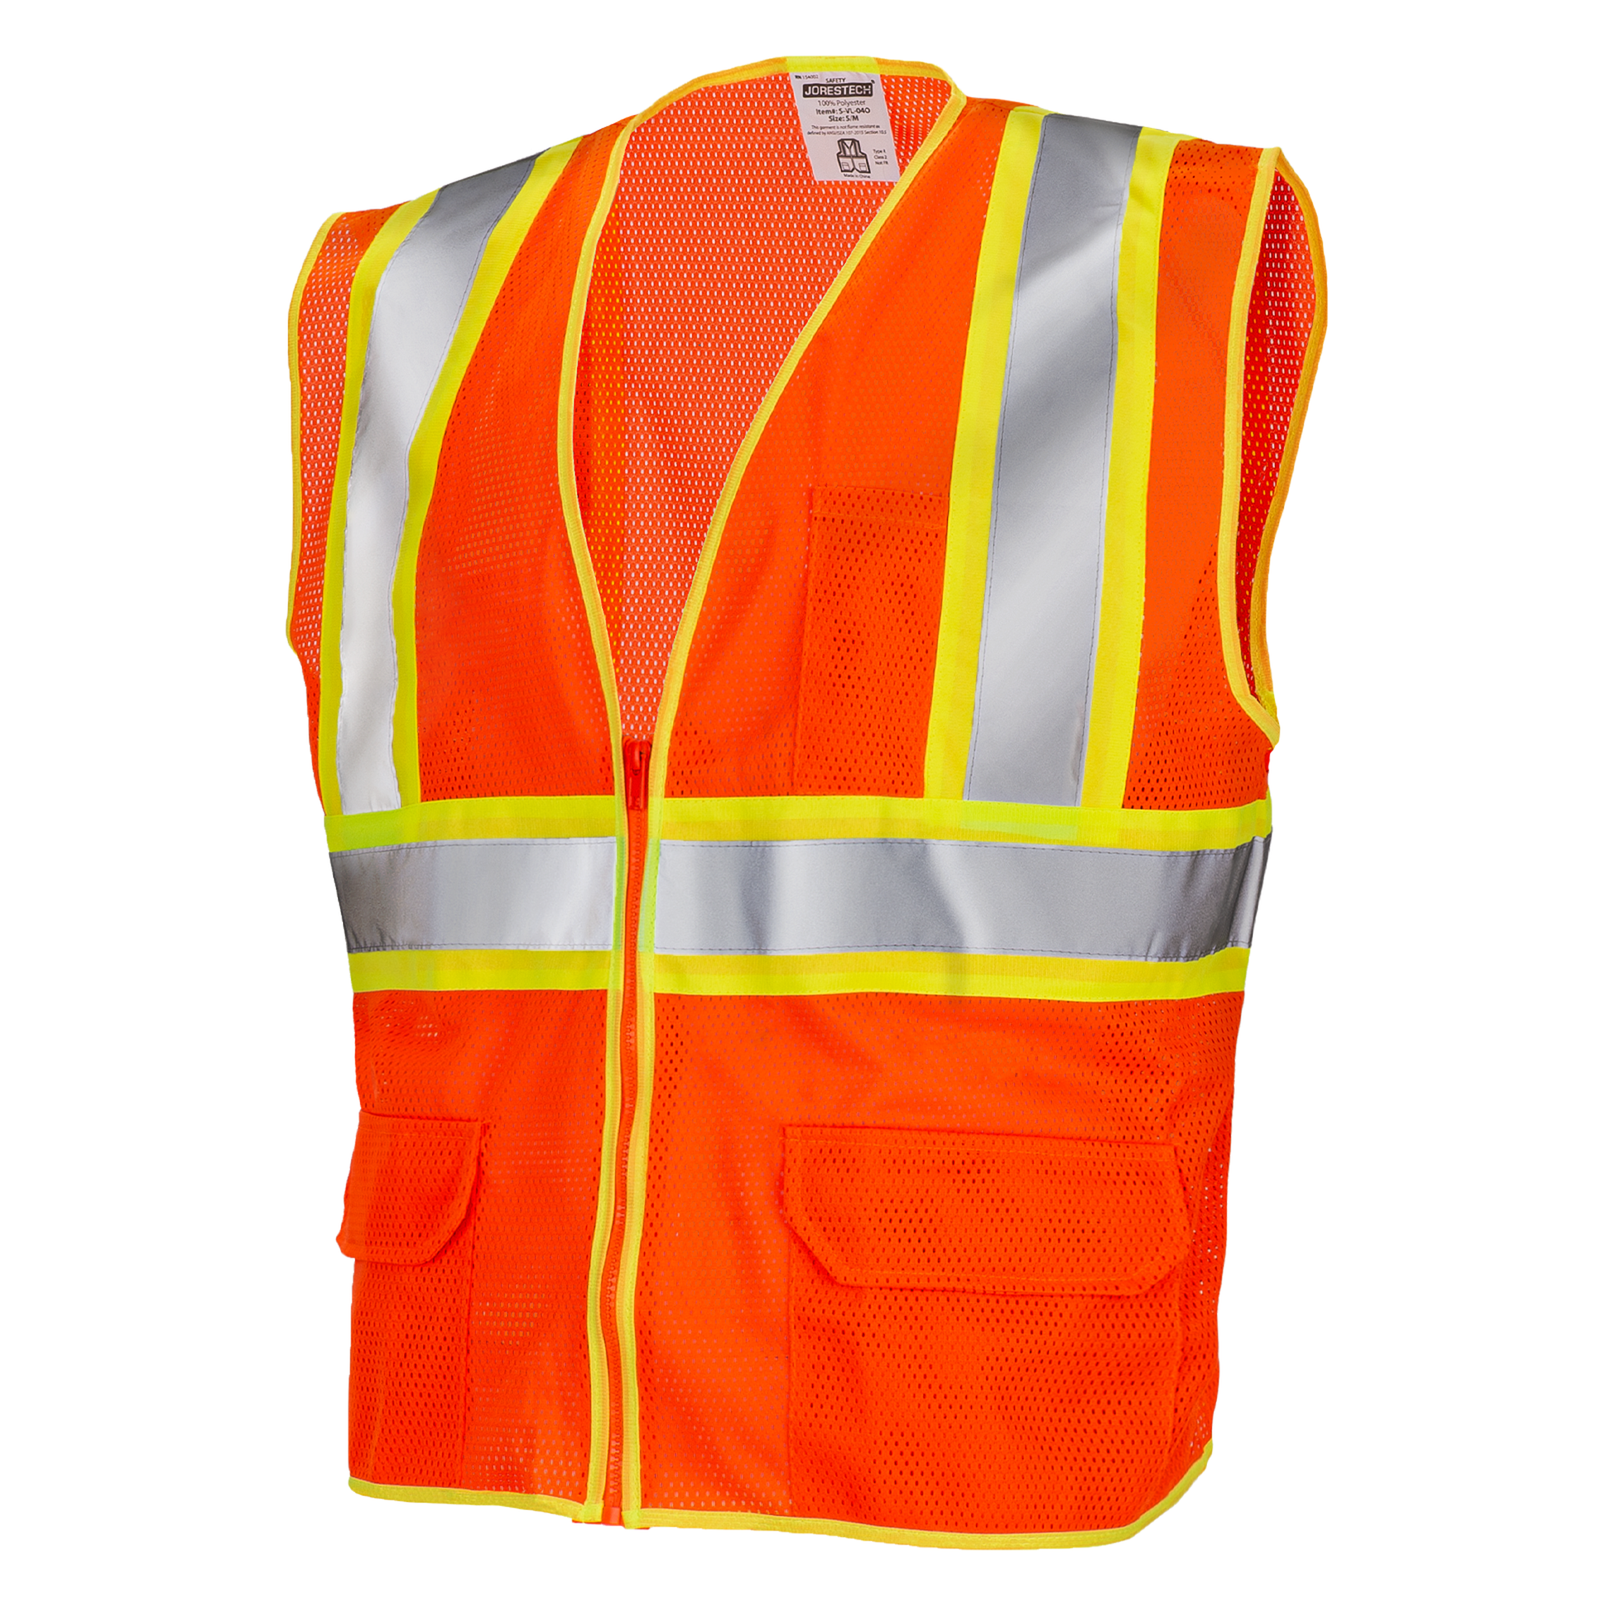 Diagonal view of the hi vis two toned Orange mesh safety vest Type R Class 2 with 2 inches reflective strip and pockets by JORESTECH®